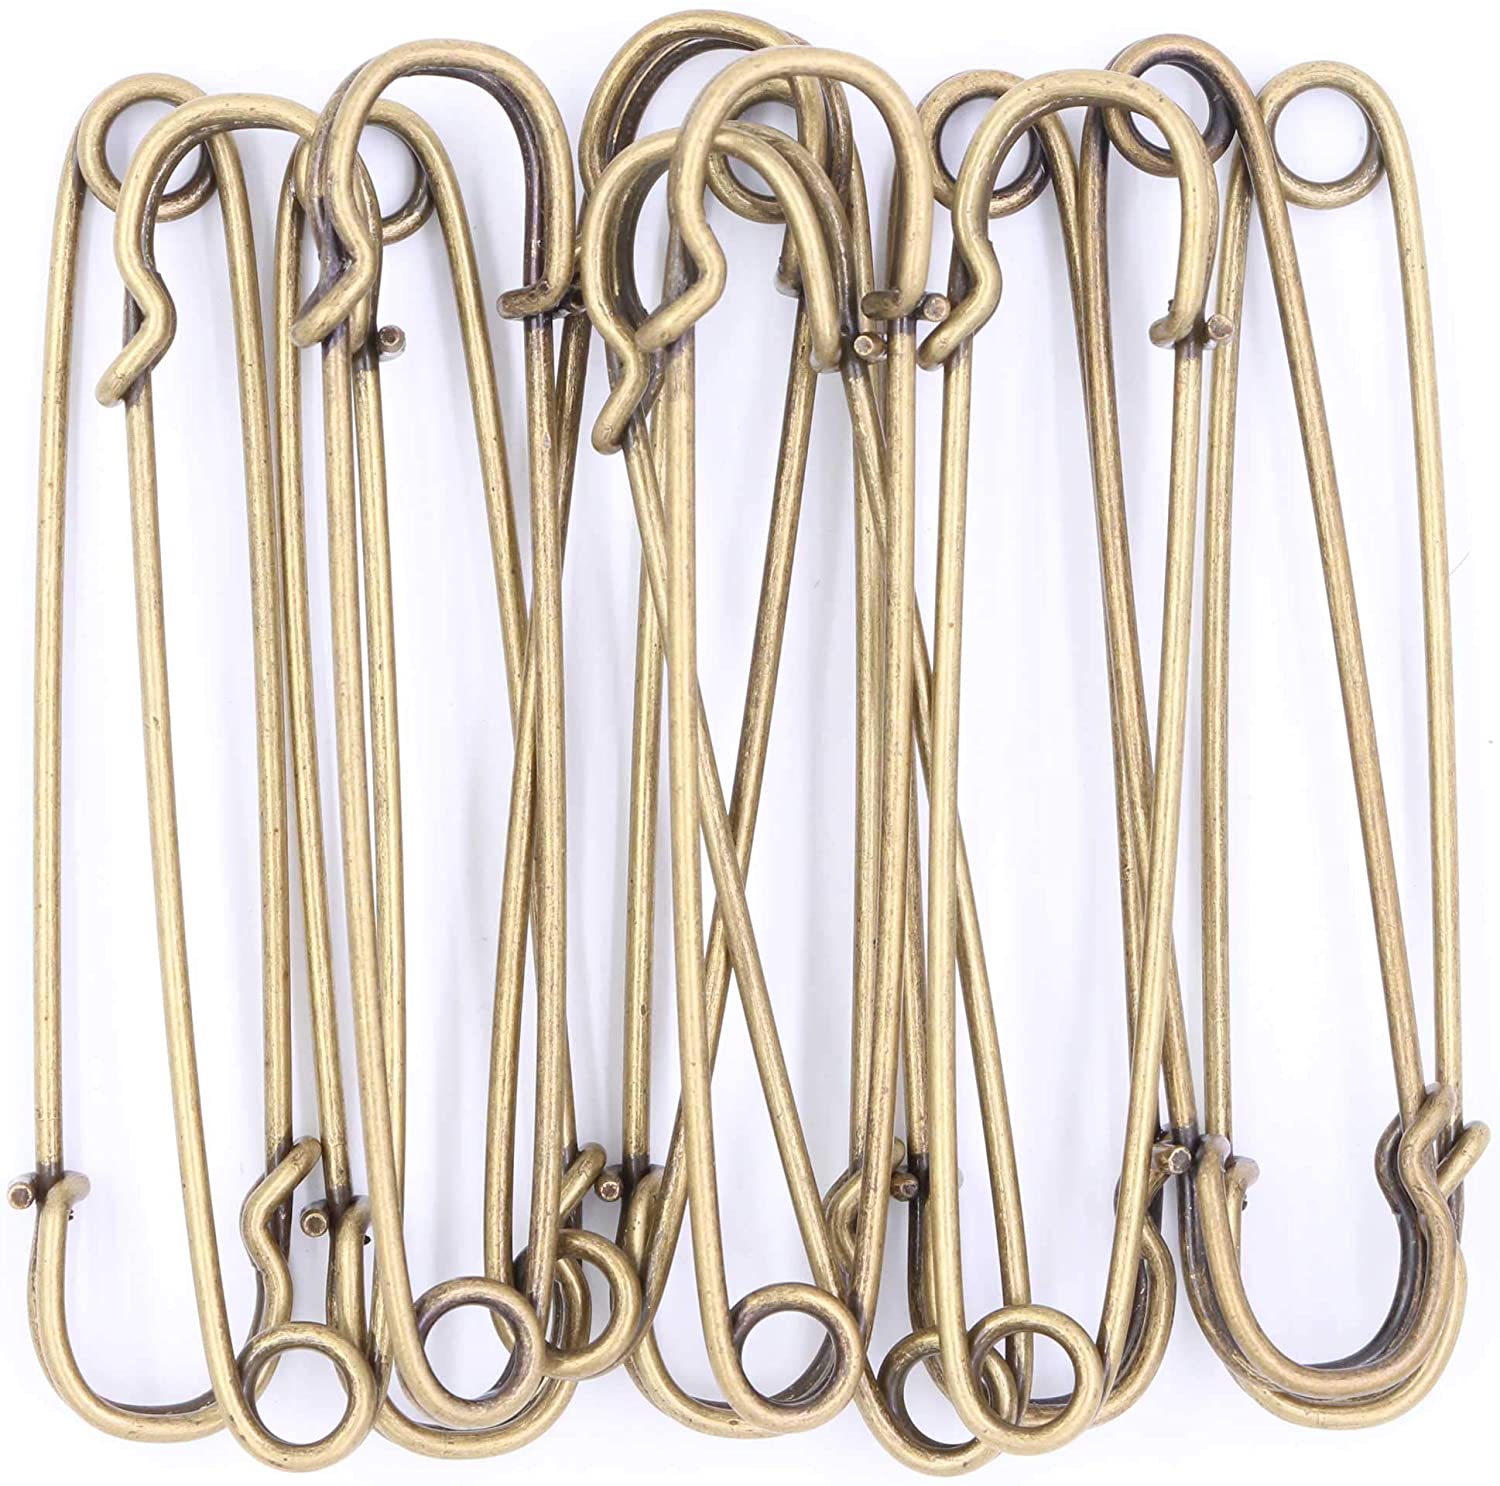 Large Safety Pins Pack of 15, Safety Pins Heavy Duty Assorted (3，4),  Blanket Pins Safety Pin Extra Sturdy Bulk Pins 